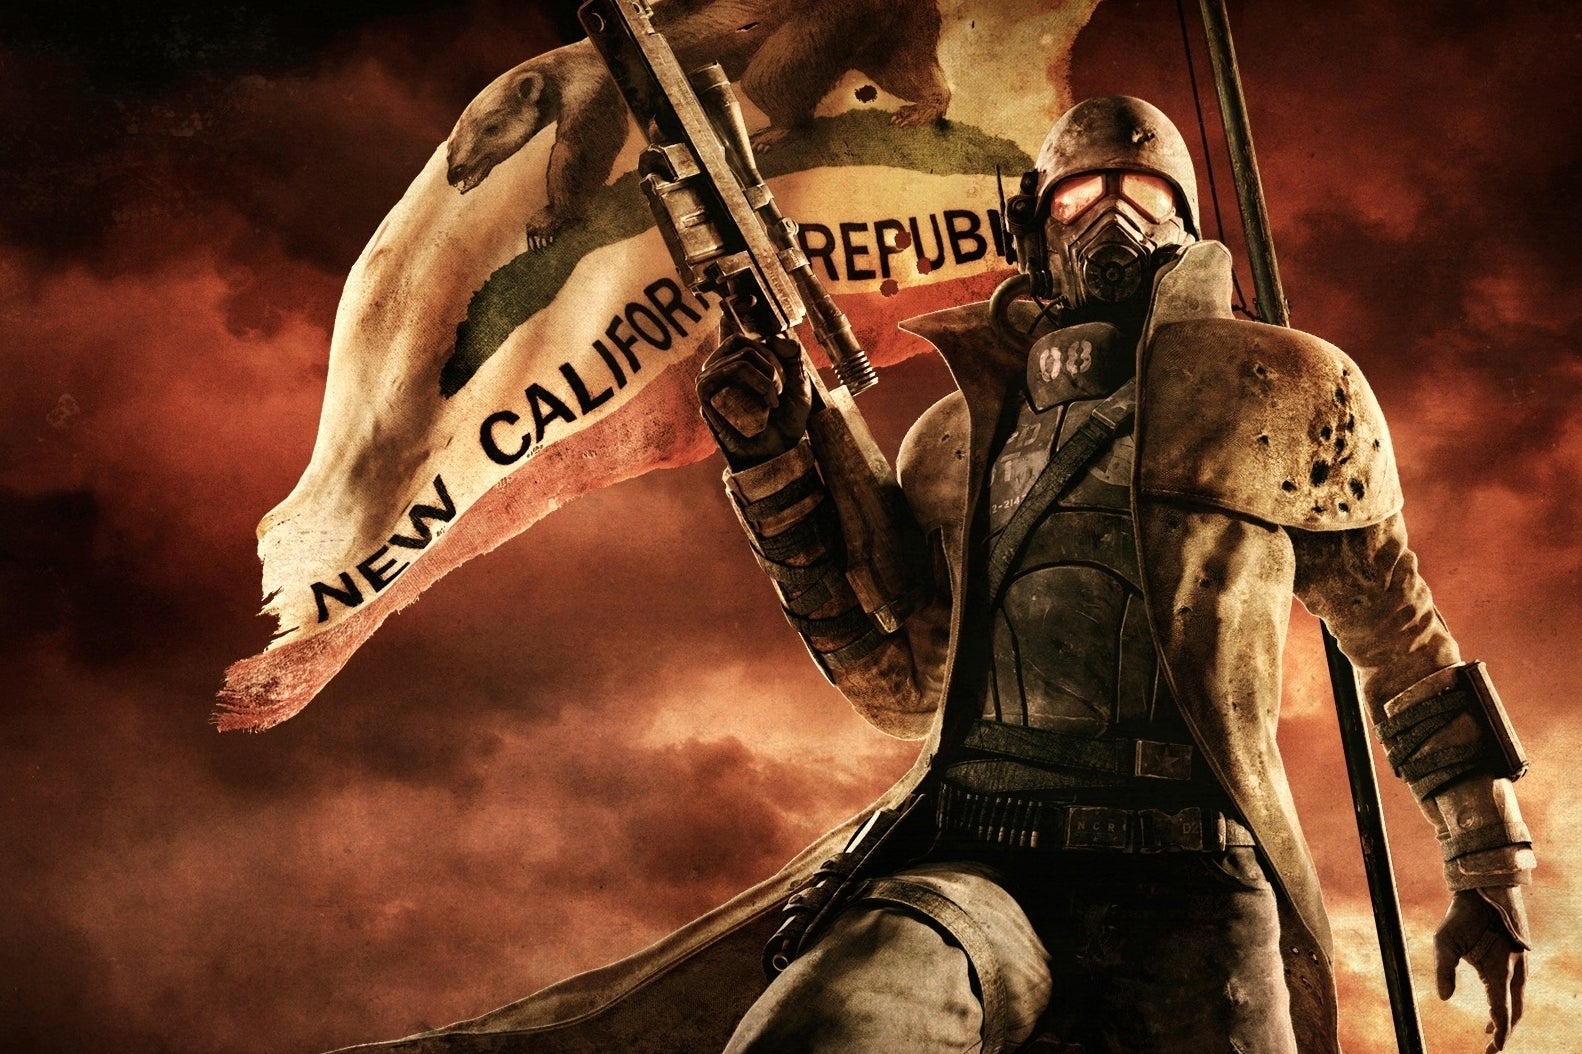 Image for Fallout: New Vegas writer joins Guerrilla Games